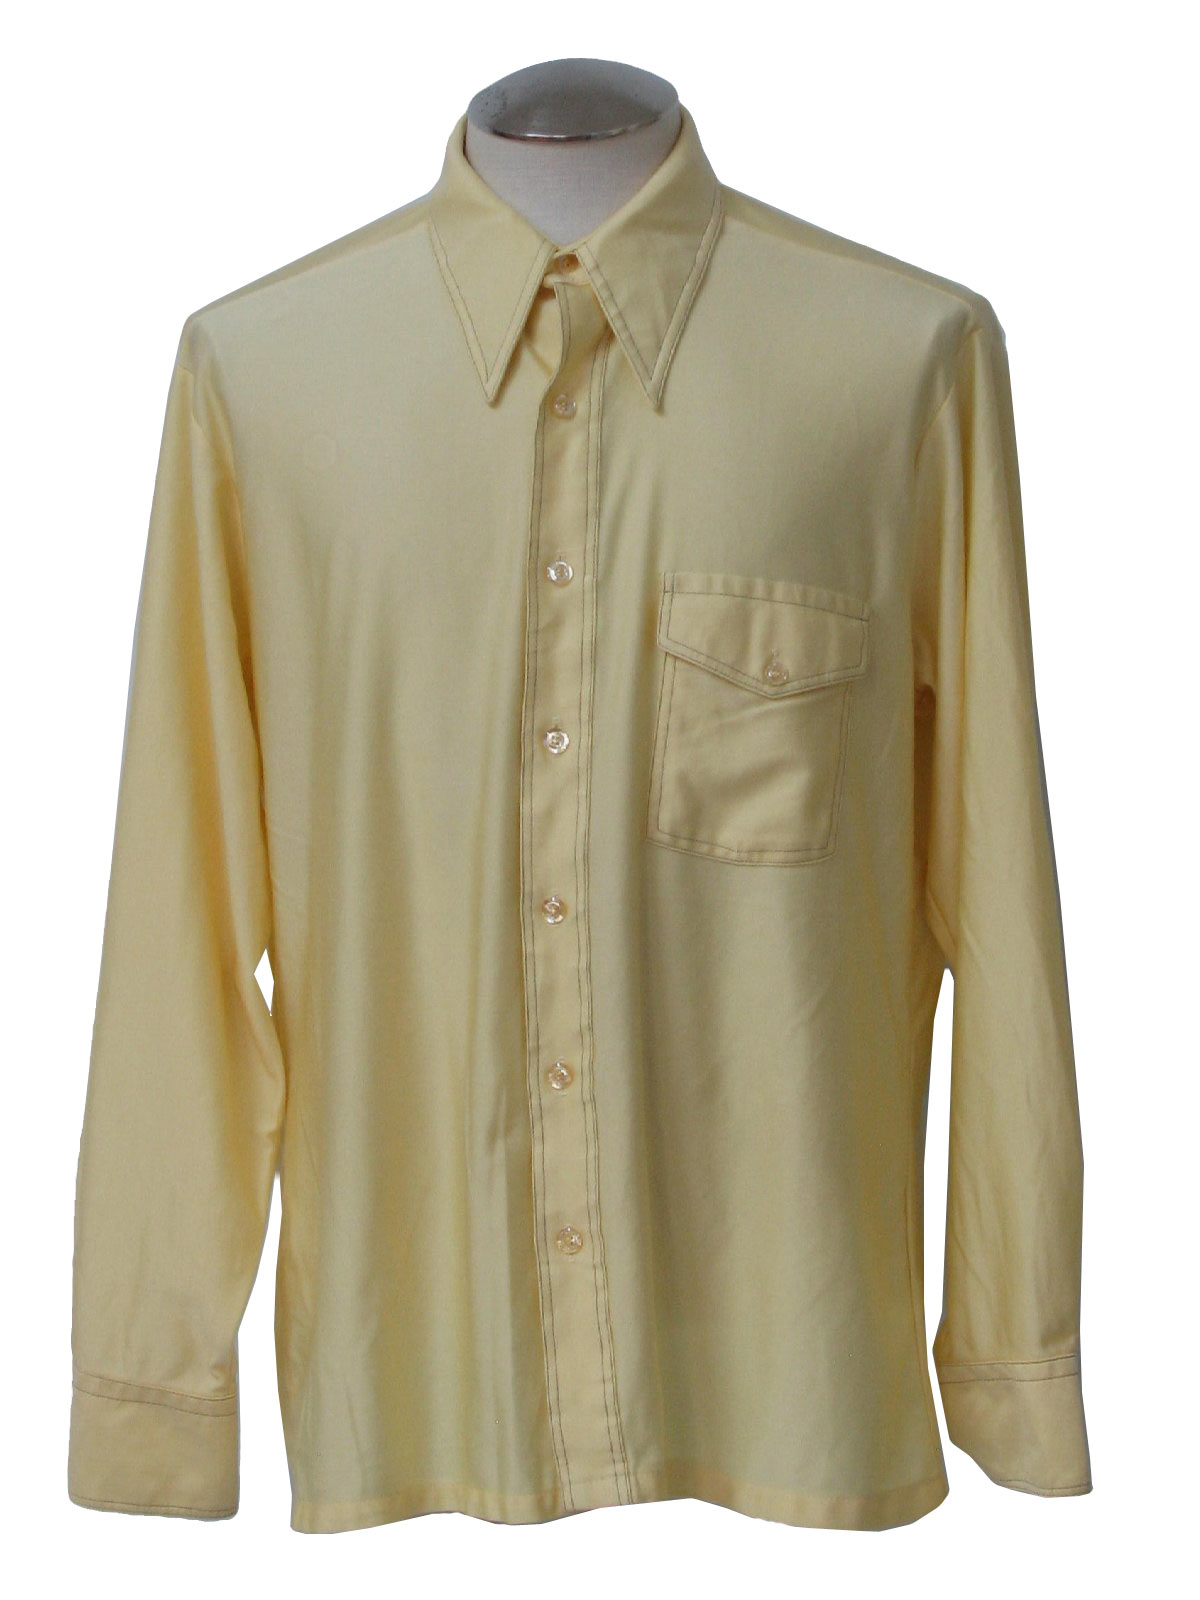 1970's Disco Shirt (JCPenney): 70s -JCPenney- Mens bright yellow ...